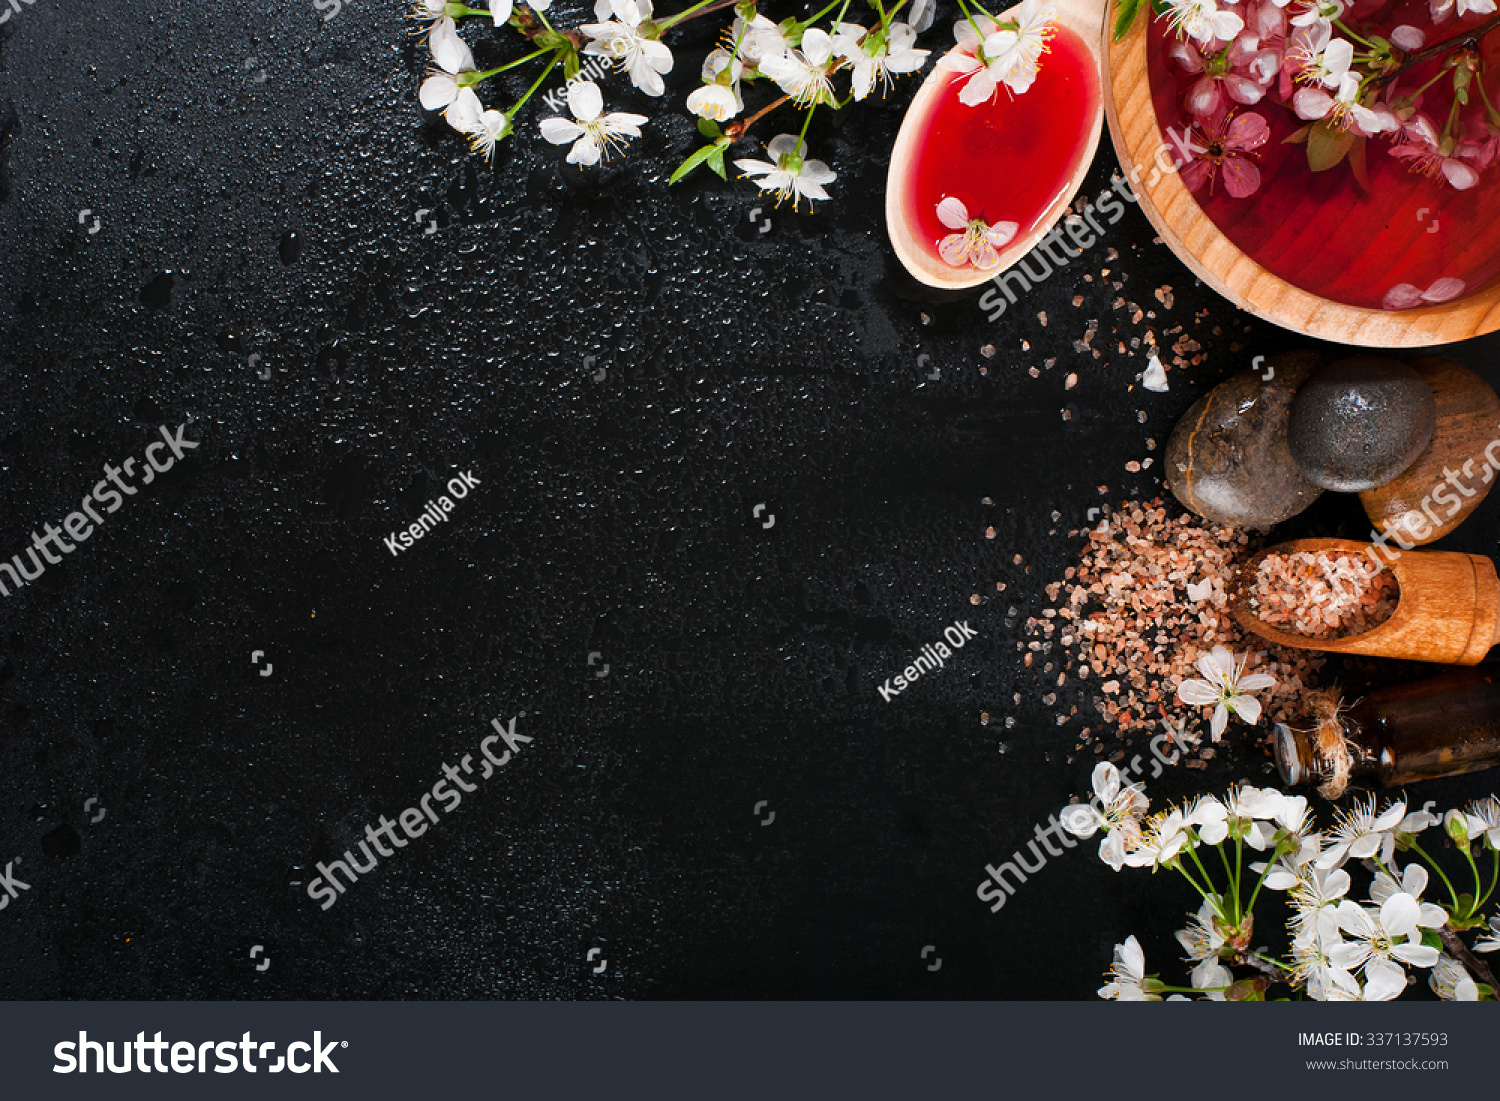 Spa concept on a dark background. Sea salt, flowering branches of cherry, aromatic oils #337137593